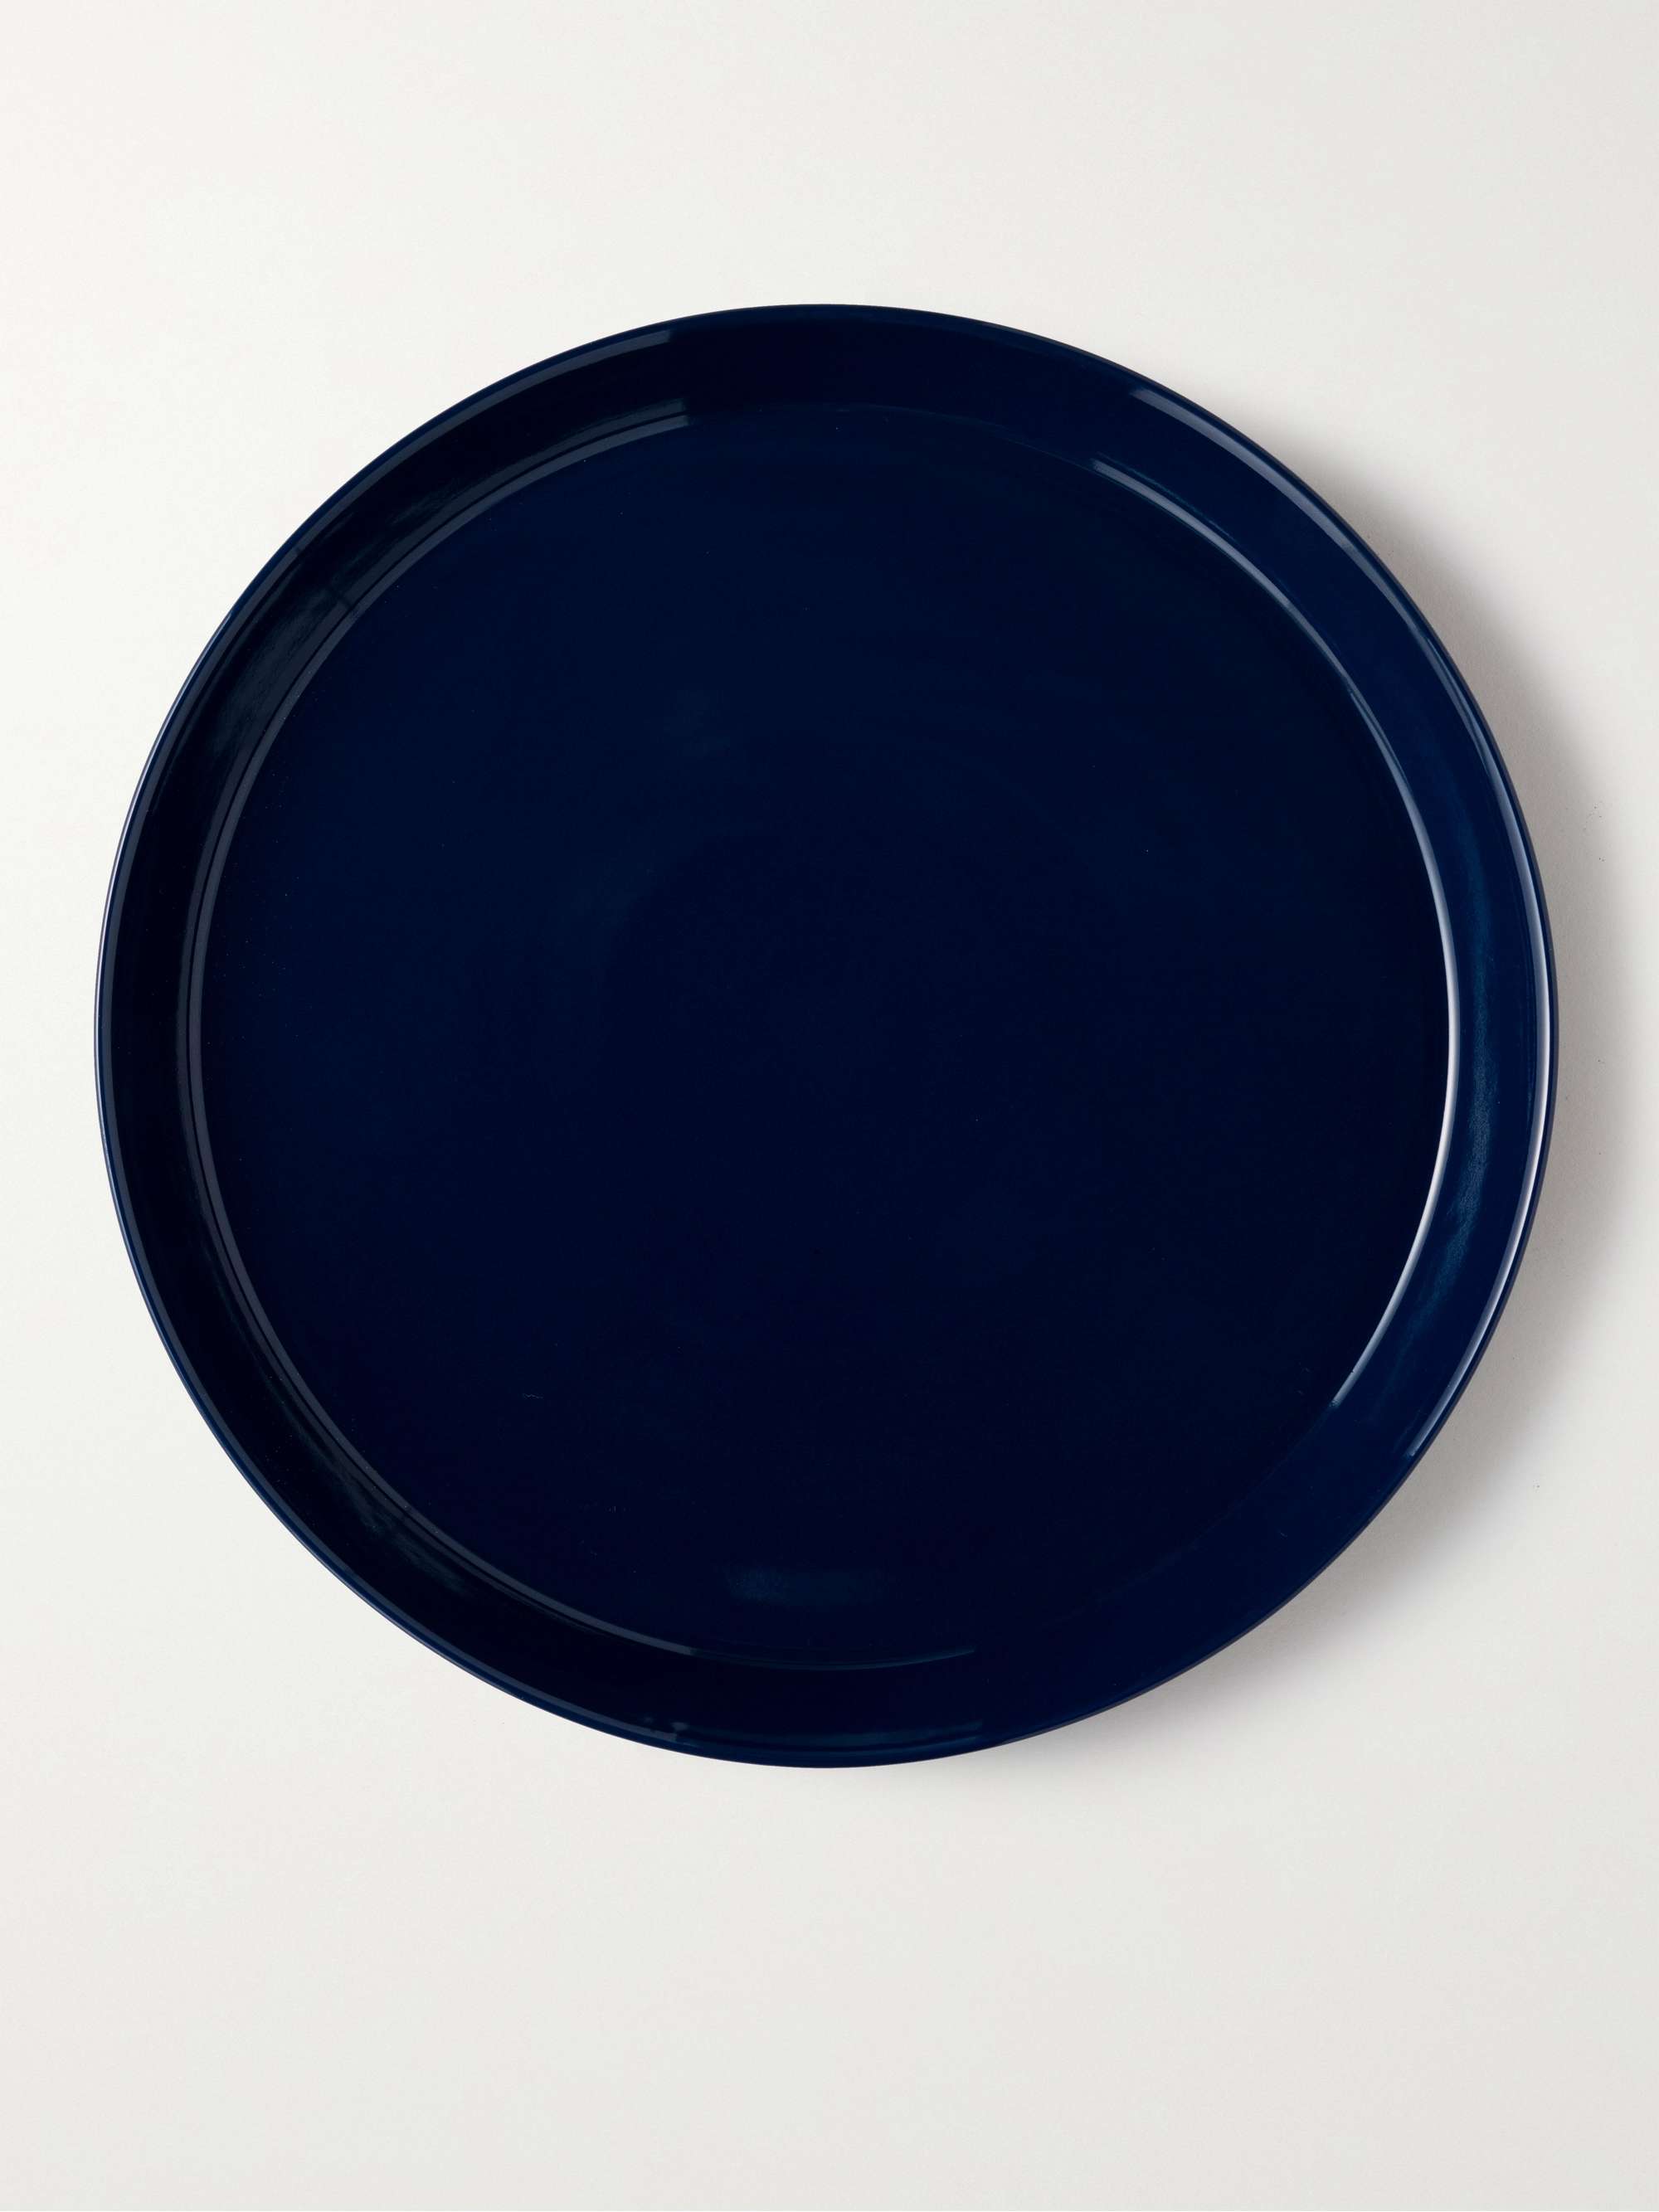 BY JAPAN Maruhiro + Hasami Large Porcelain Plate